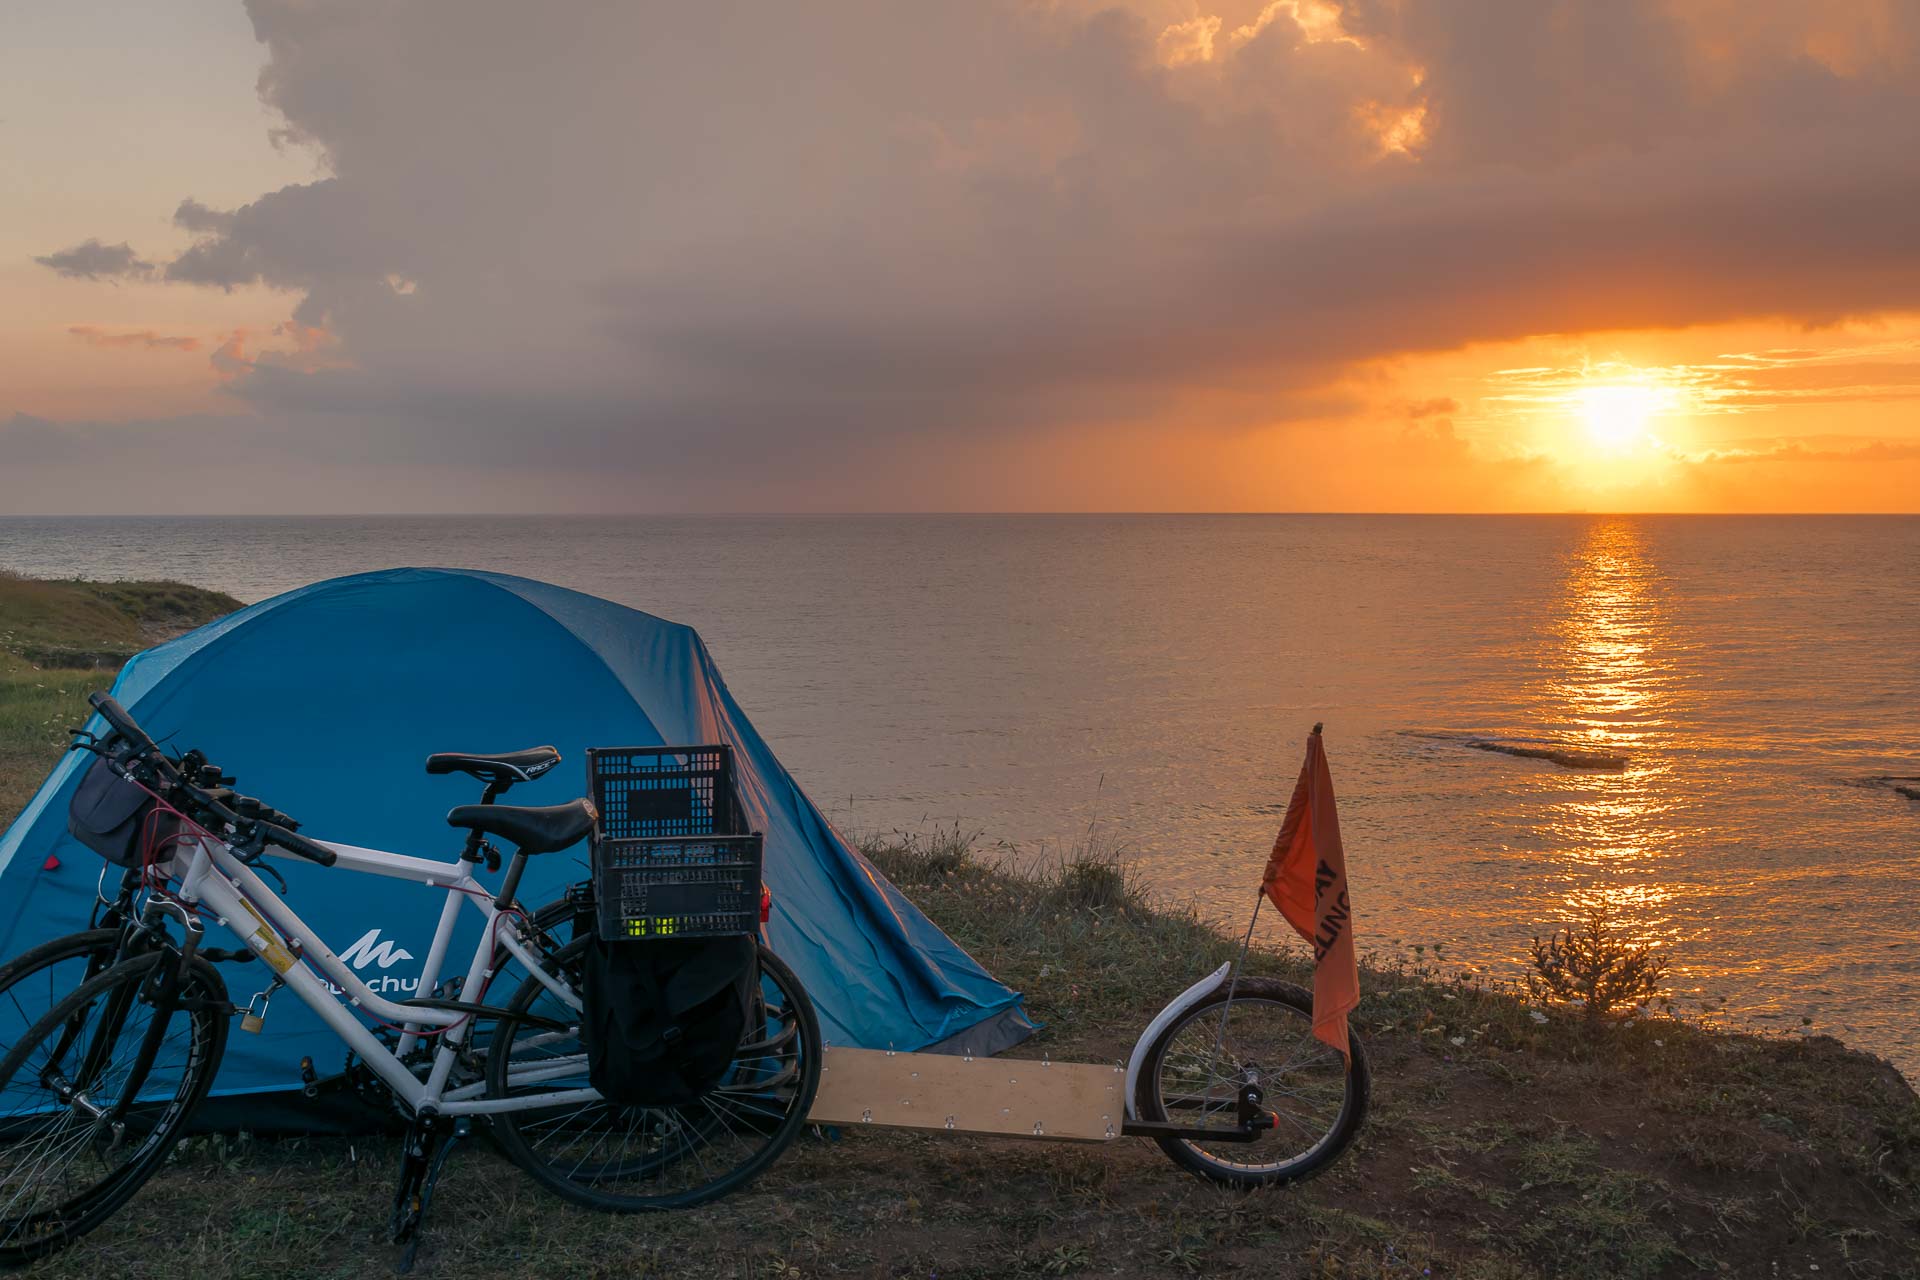 A bike near the camping tent on top of the cliff with the sunset